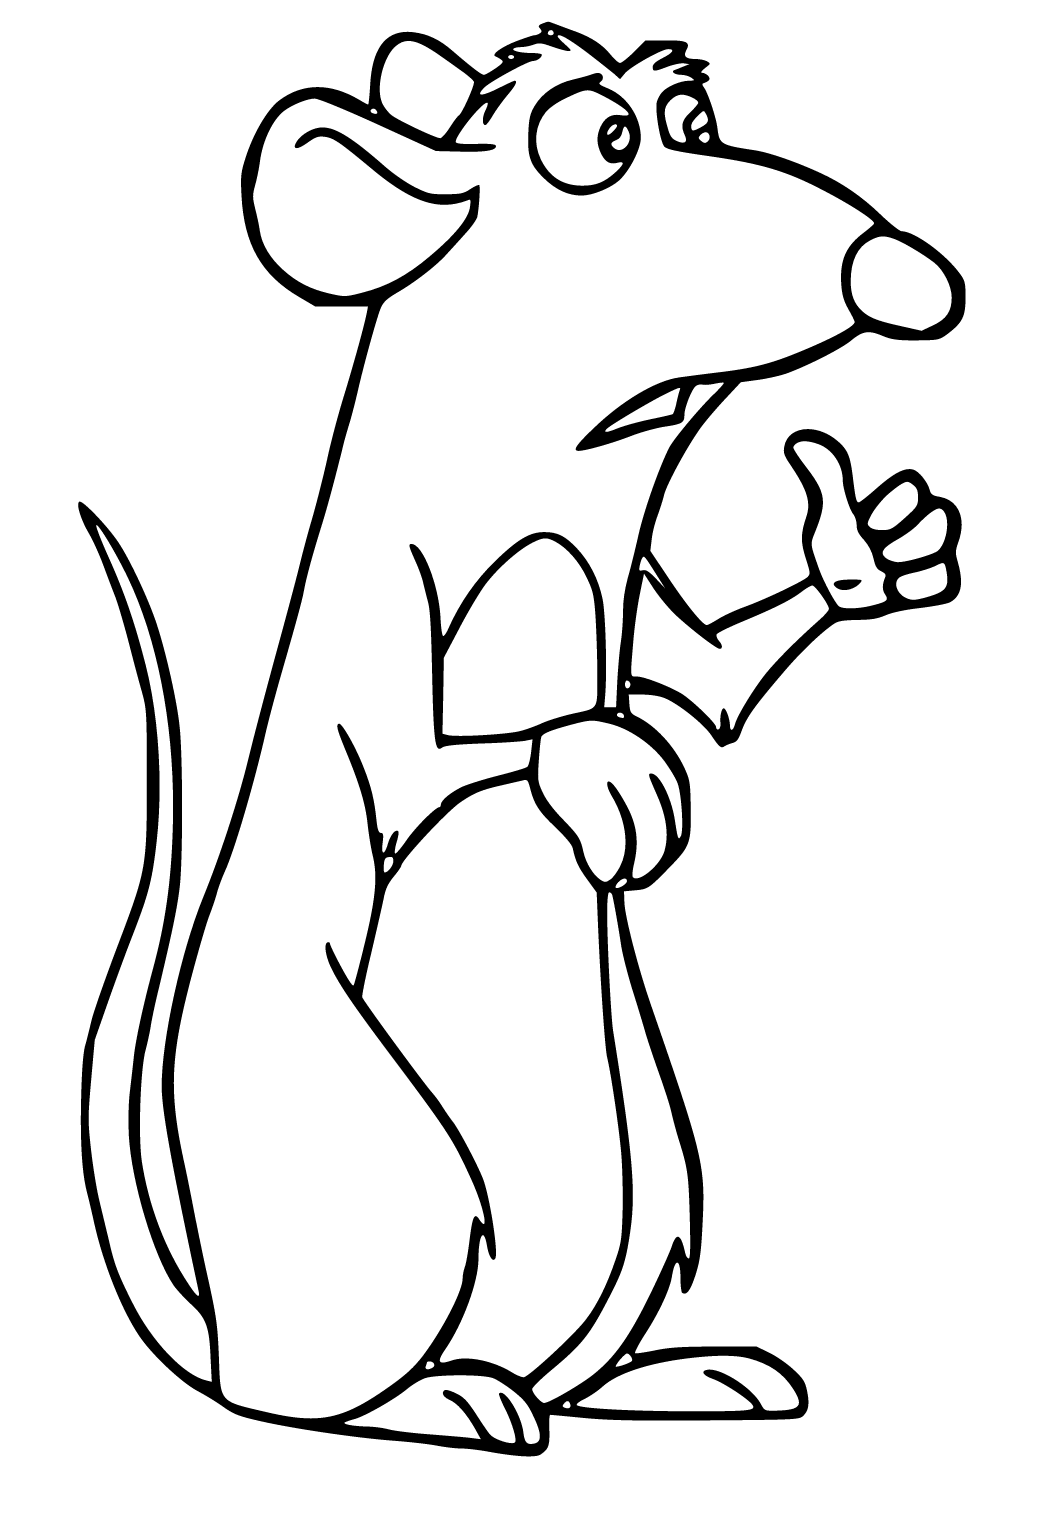 Free printable ratatouille fine coloring page for adults and kids